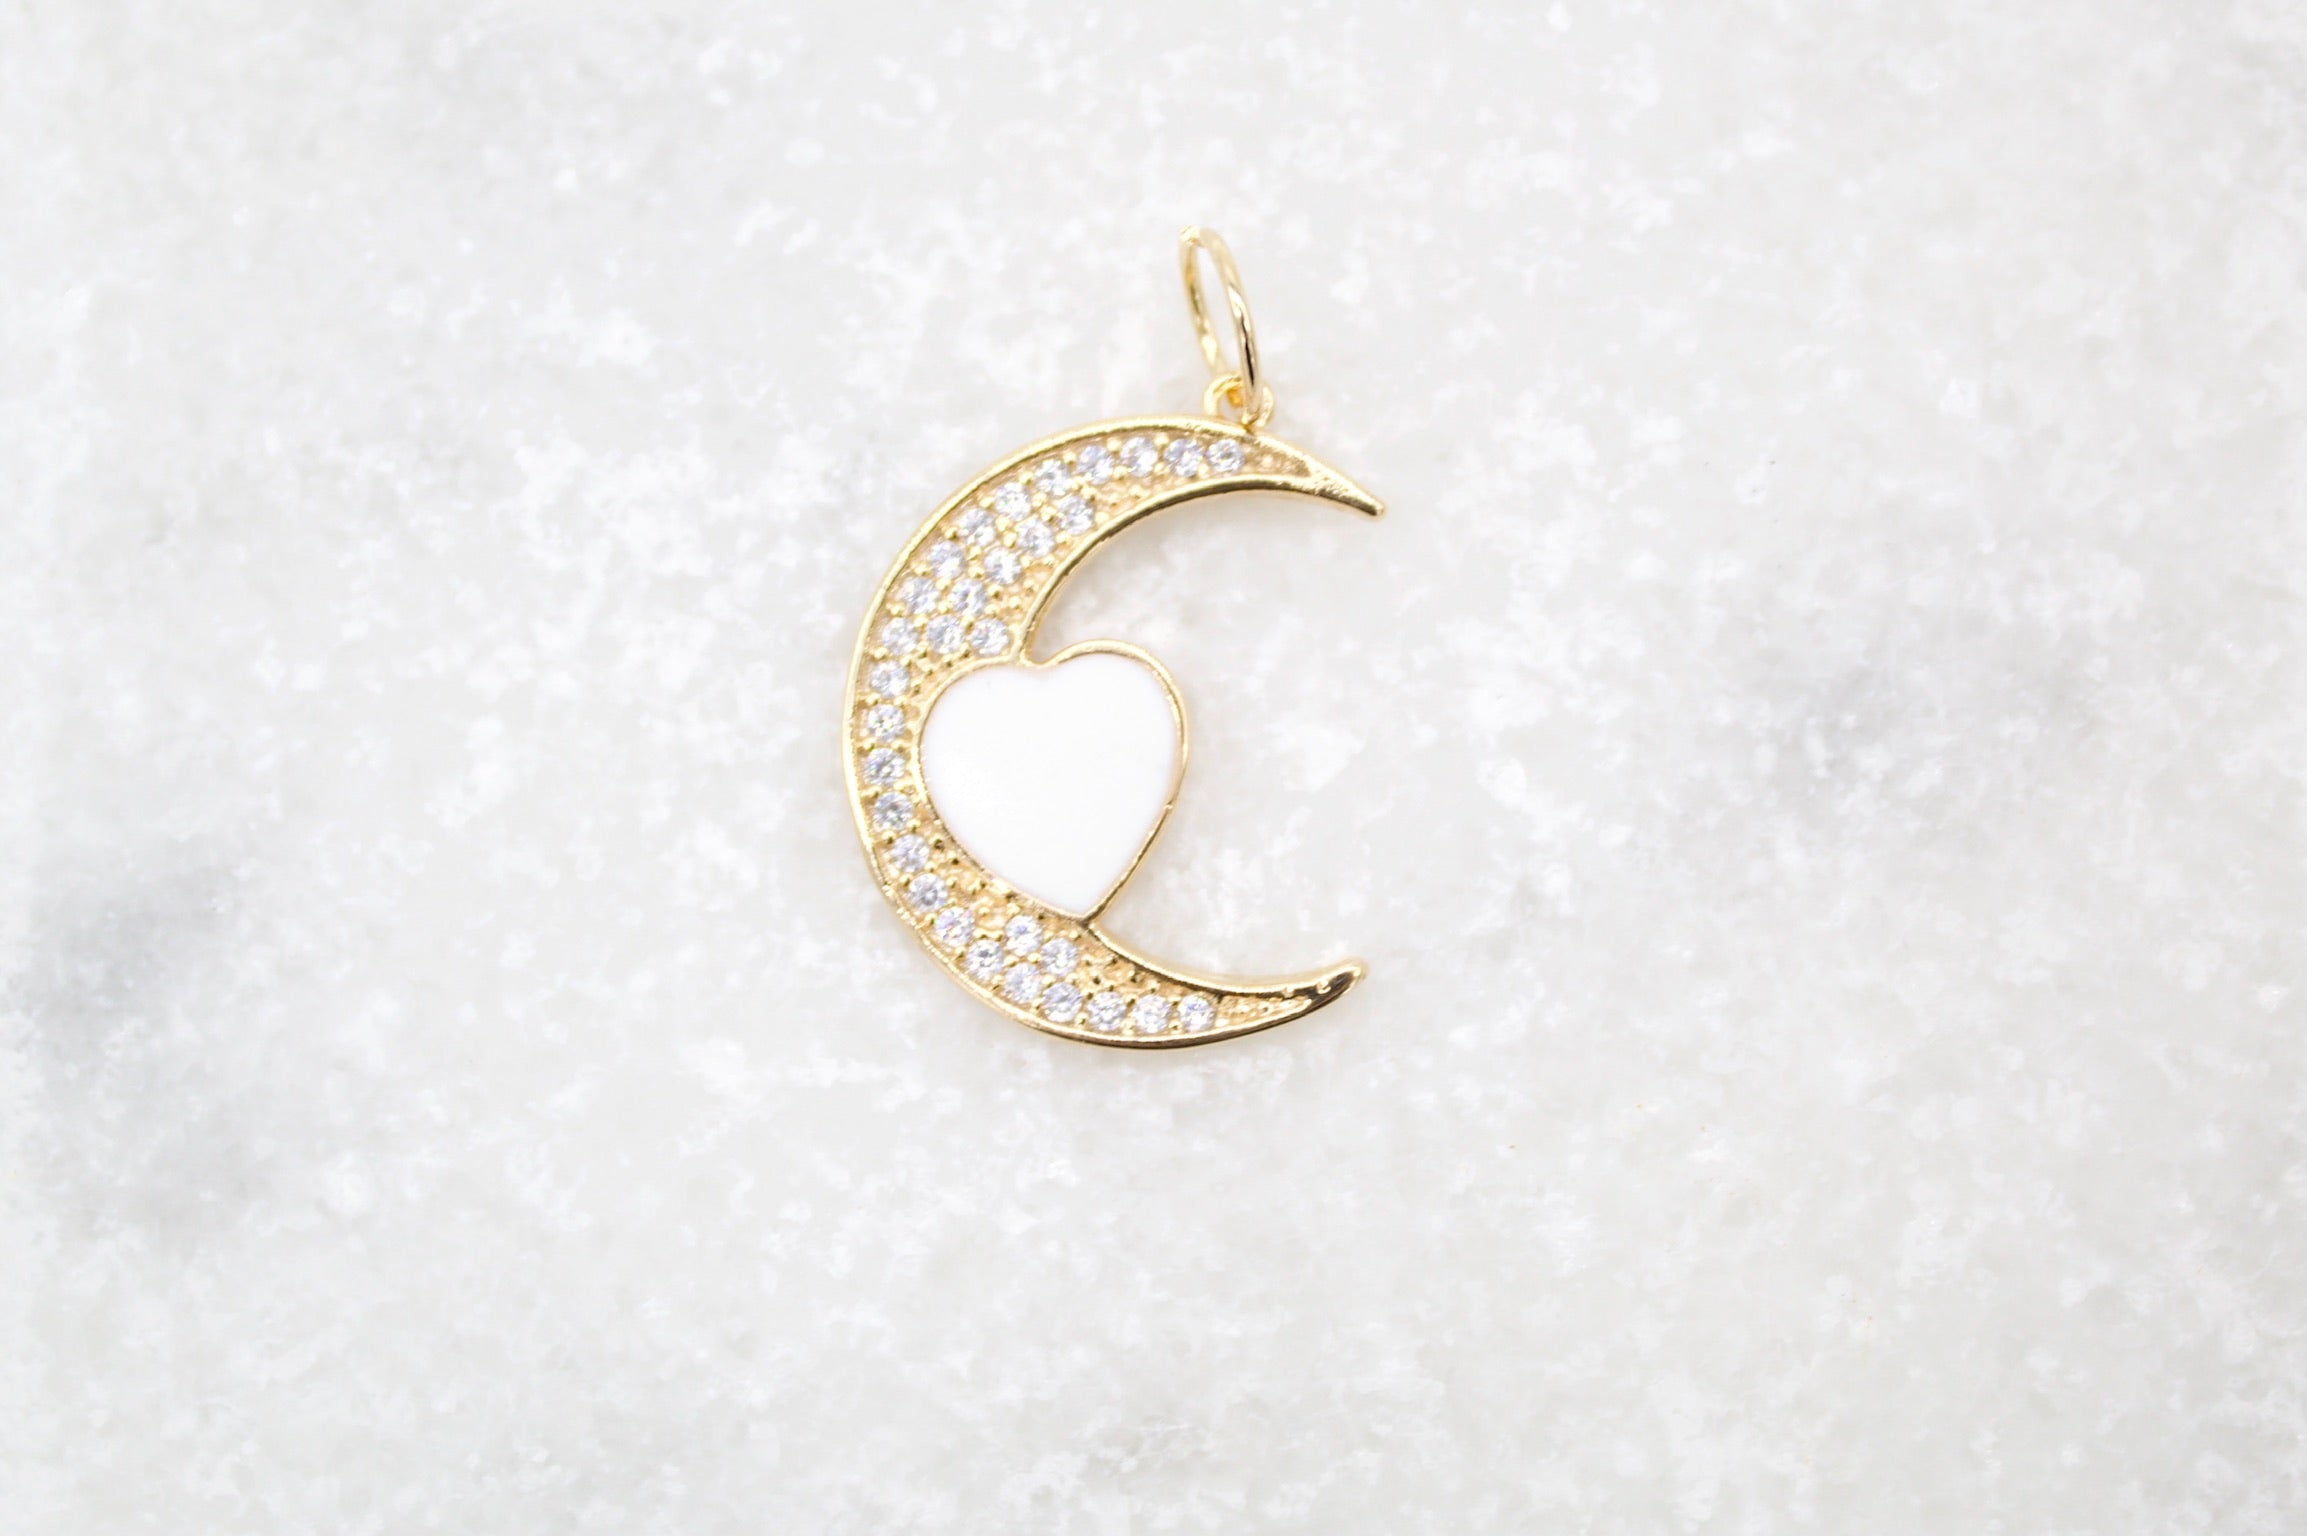 18K Gold Filled CZ Crescent Moon With Enamel Heart Pendant